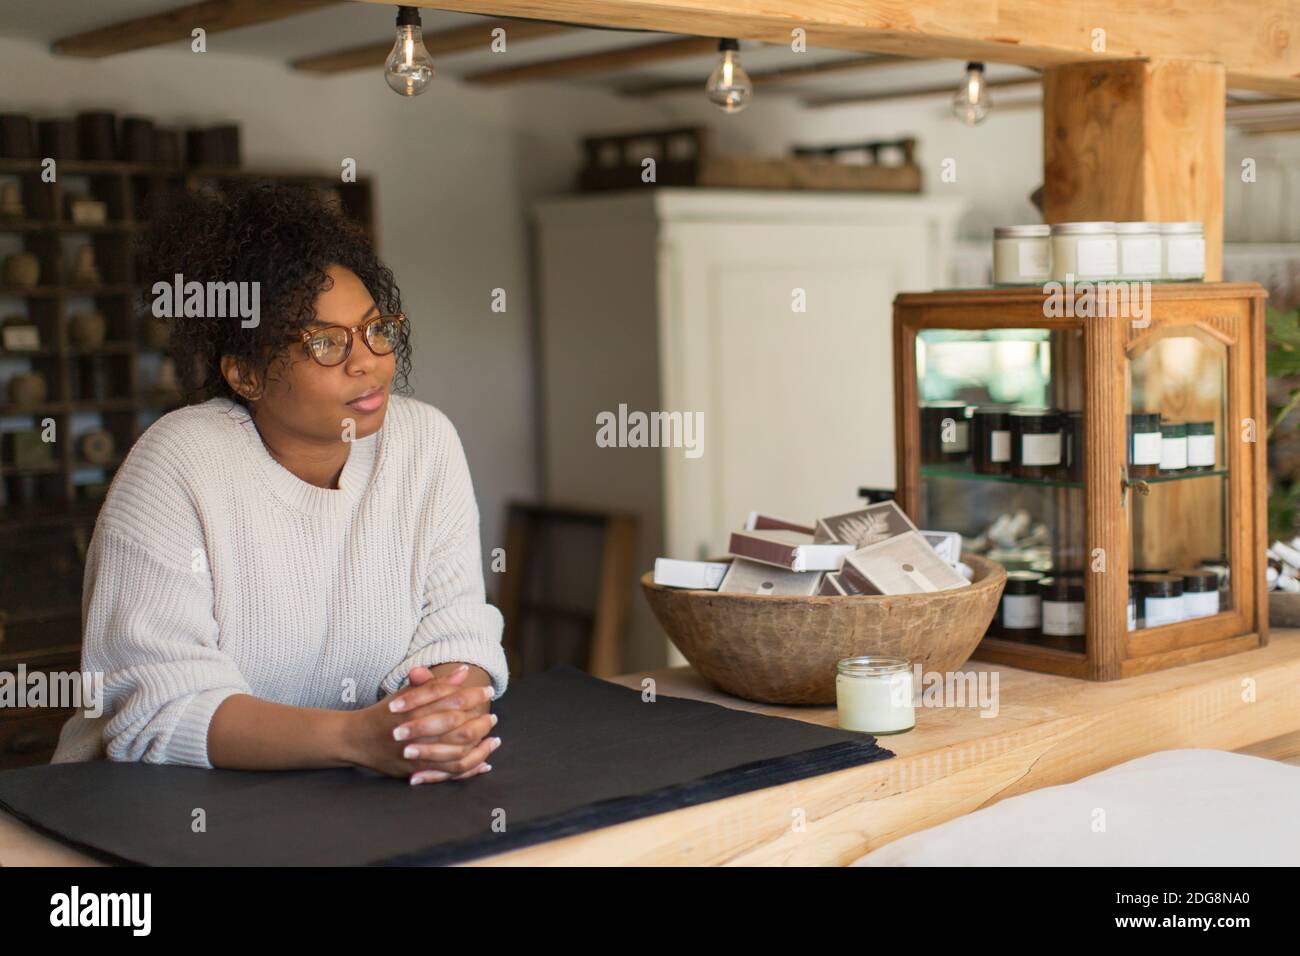 Thoughtful female shop owner behind counter Stock Photo